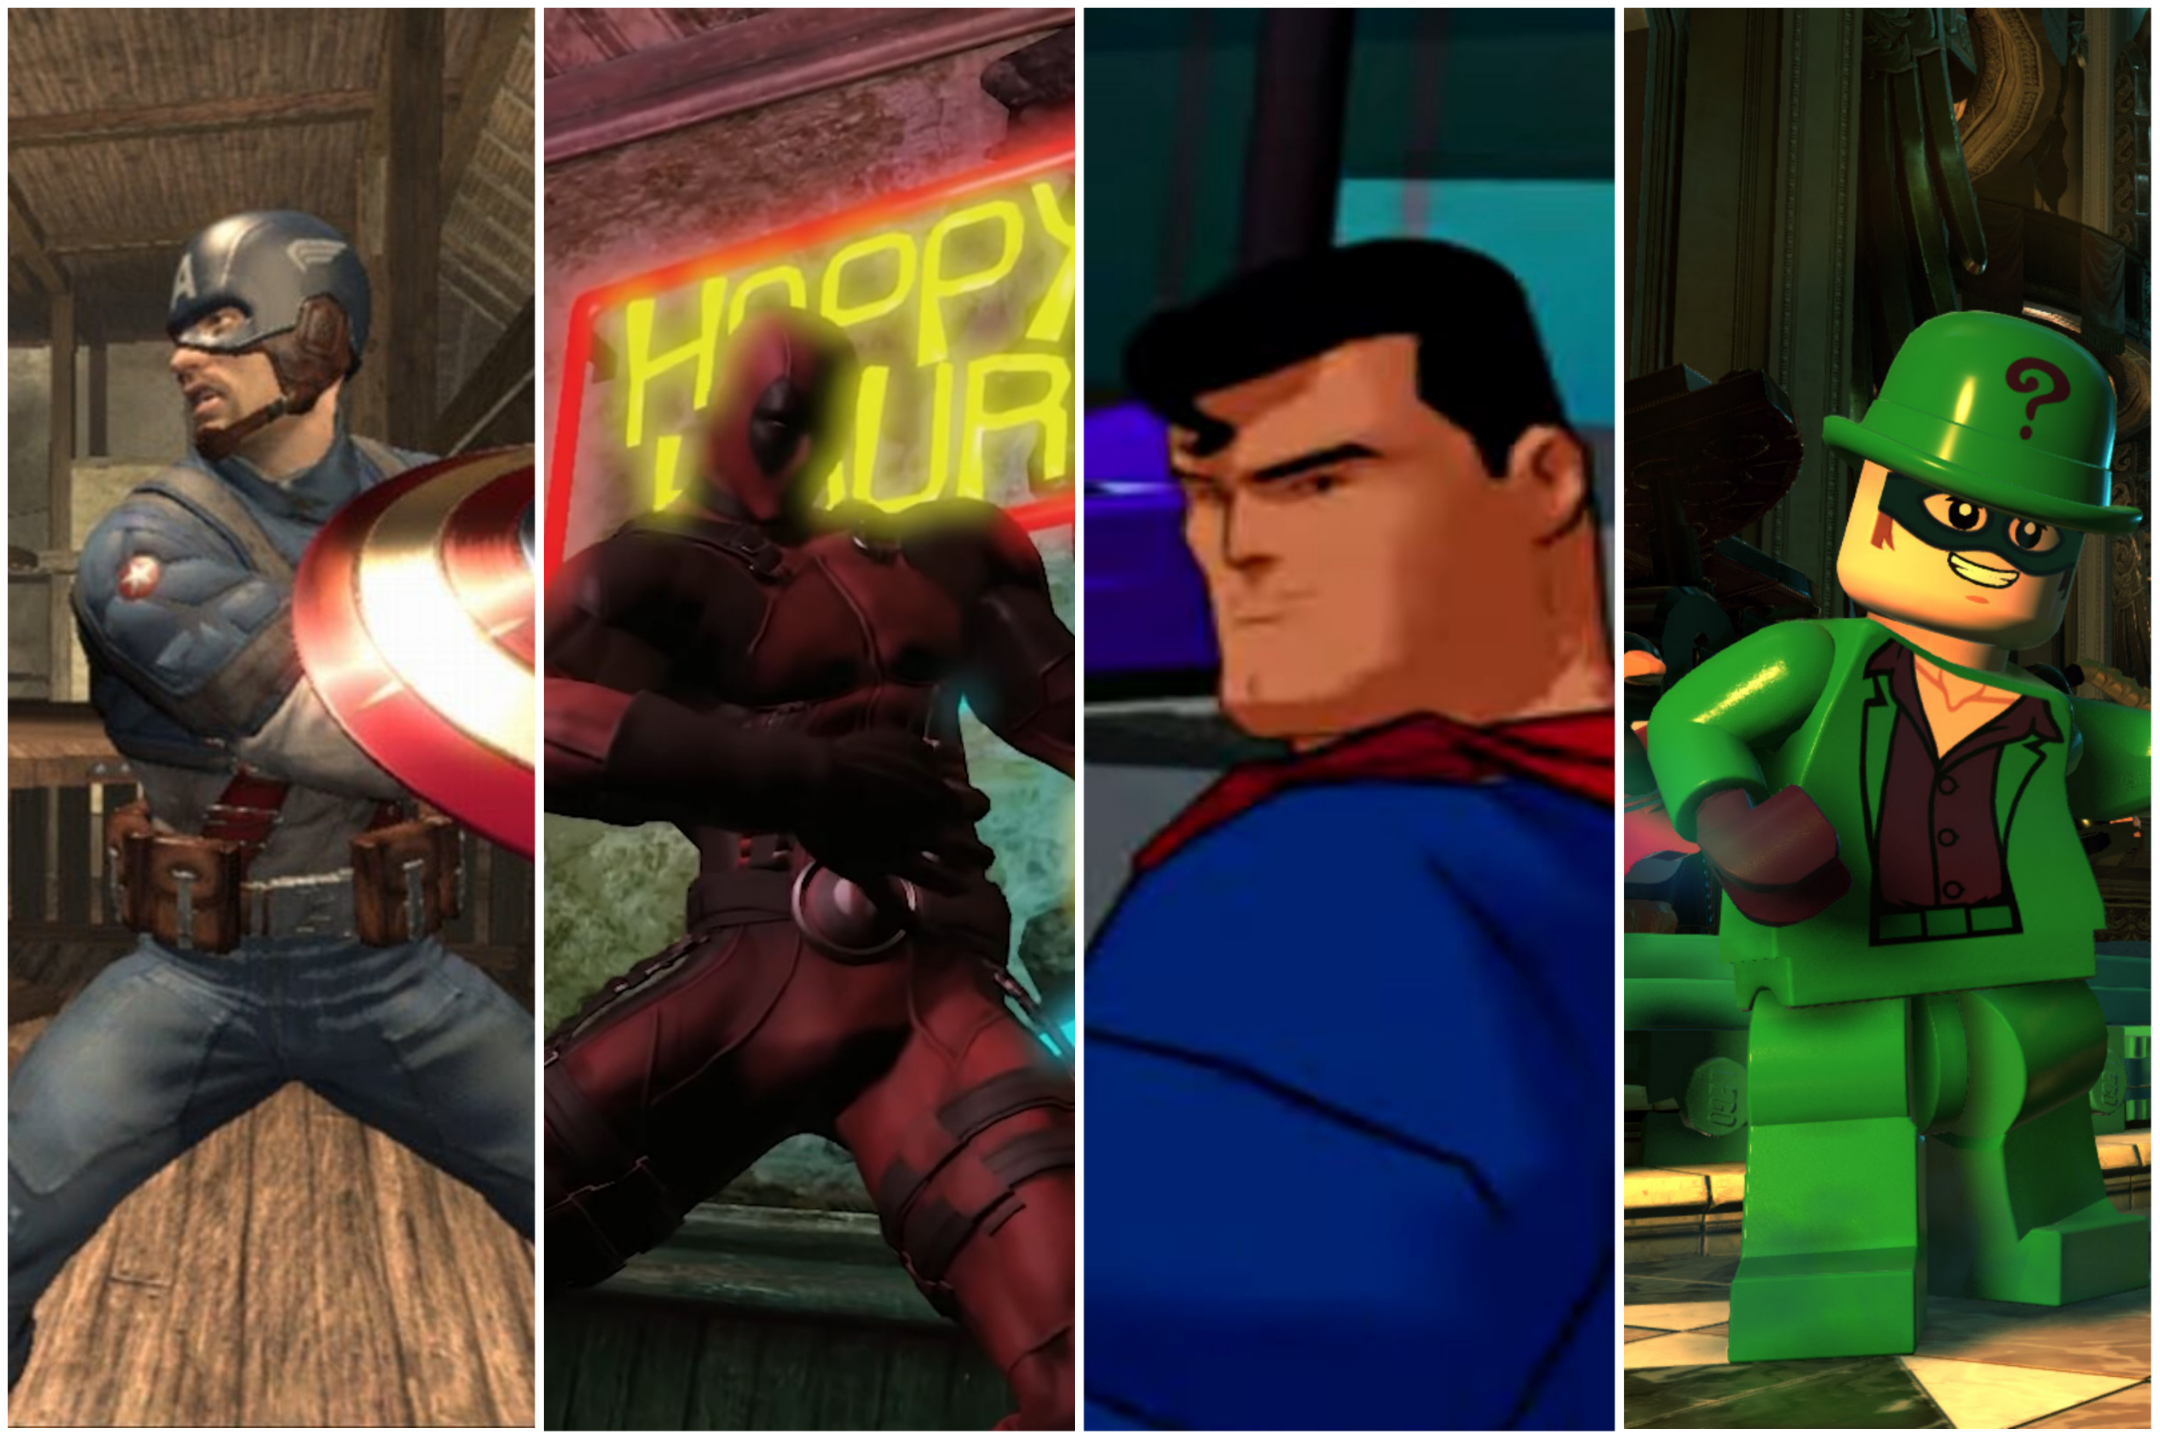 10 best superhero games of all time